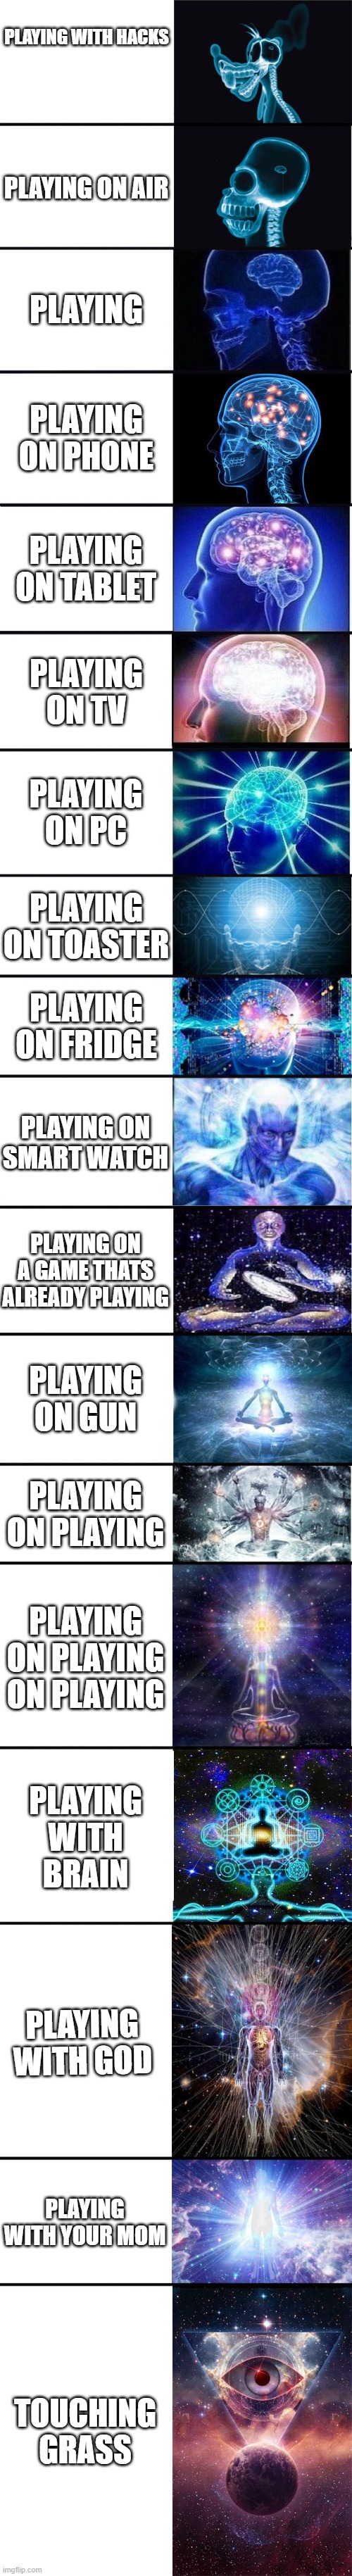 expanding brain: 9001 | PLAYING WITH HACKS; PLAYING ON AIR; PLAYING; PLAYING ON PHONE; PLAYING ON TABLET; PLAYING ON TV; PLAYING ON PC; PLAYING ON TOASTER; PLAYING ON FRIDGE; PLAYING ON SMART WATCH; PLAYING ON A GAME THATS ALREADY PLAYING; PLAYING ON GUN; PLAYING ON PLAYING; PLAYING ON PLAYING ON PLAYING; PLAYING WITH BRAIN; PLAYING WITH GOD; PLAYING WITH YOUR MOM; TOUCHING GRASS | image tagged in expanding brain 9001 | made w/ Imgflip meme maker